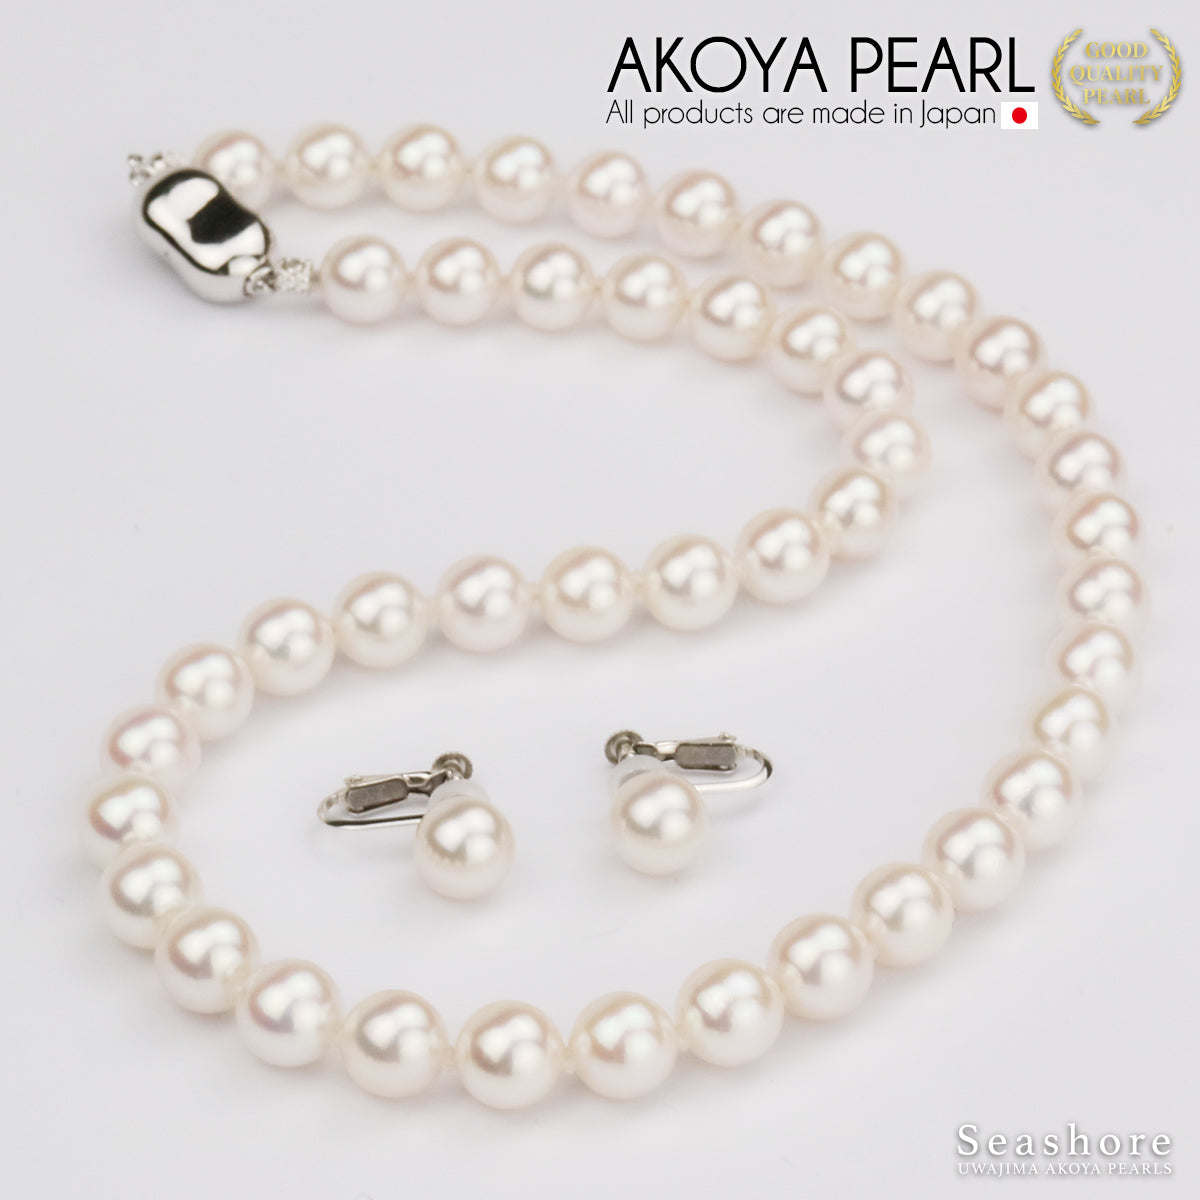 [Hanadama certified pearls] Formal necklace 2-piece set [8.5-9.0mm] (Earrings included) Akoya pearls with storage case [New Japan Pearl Research Institute certificate]